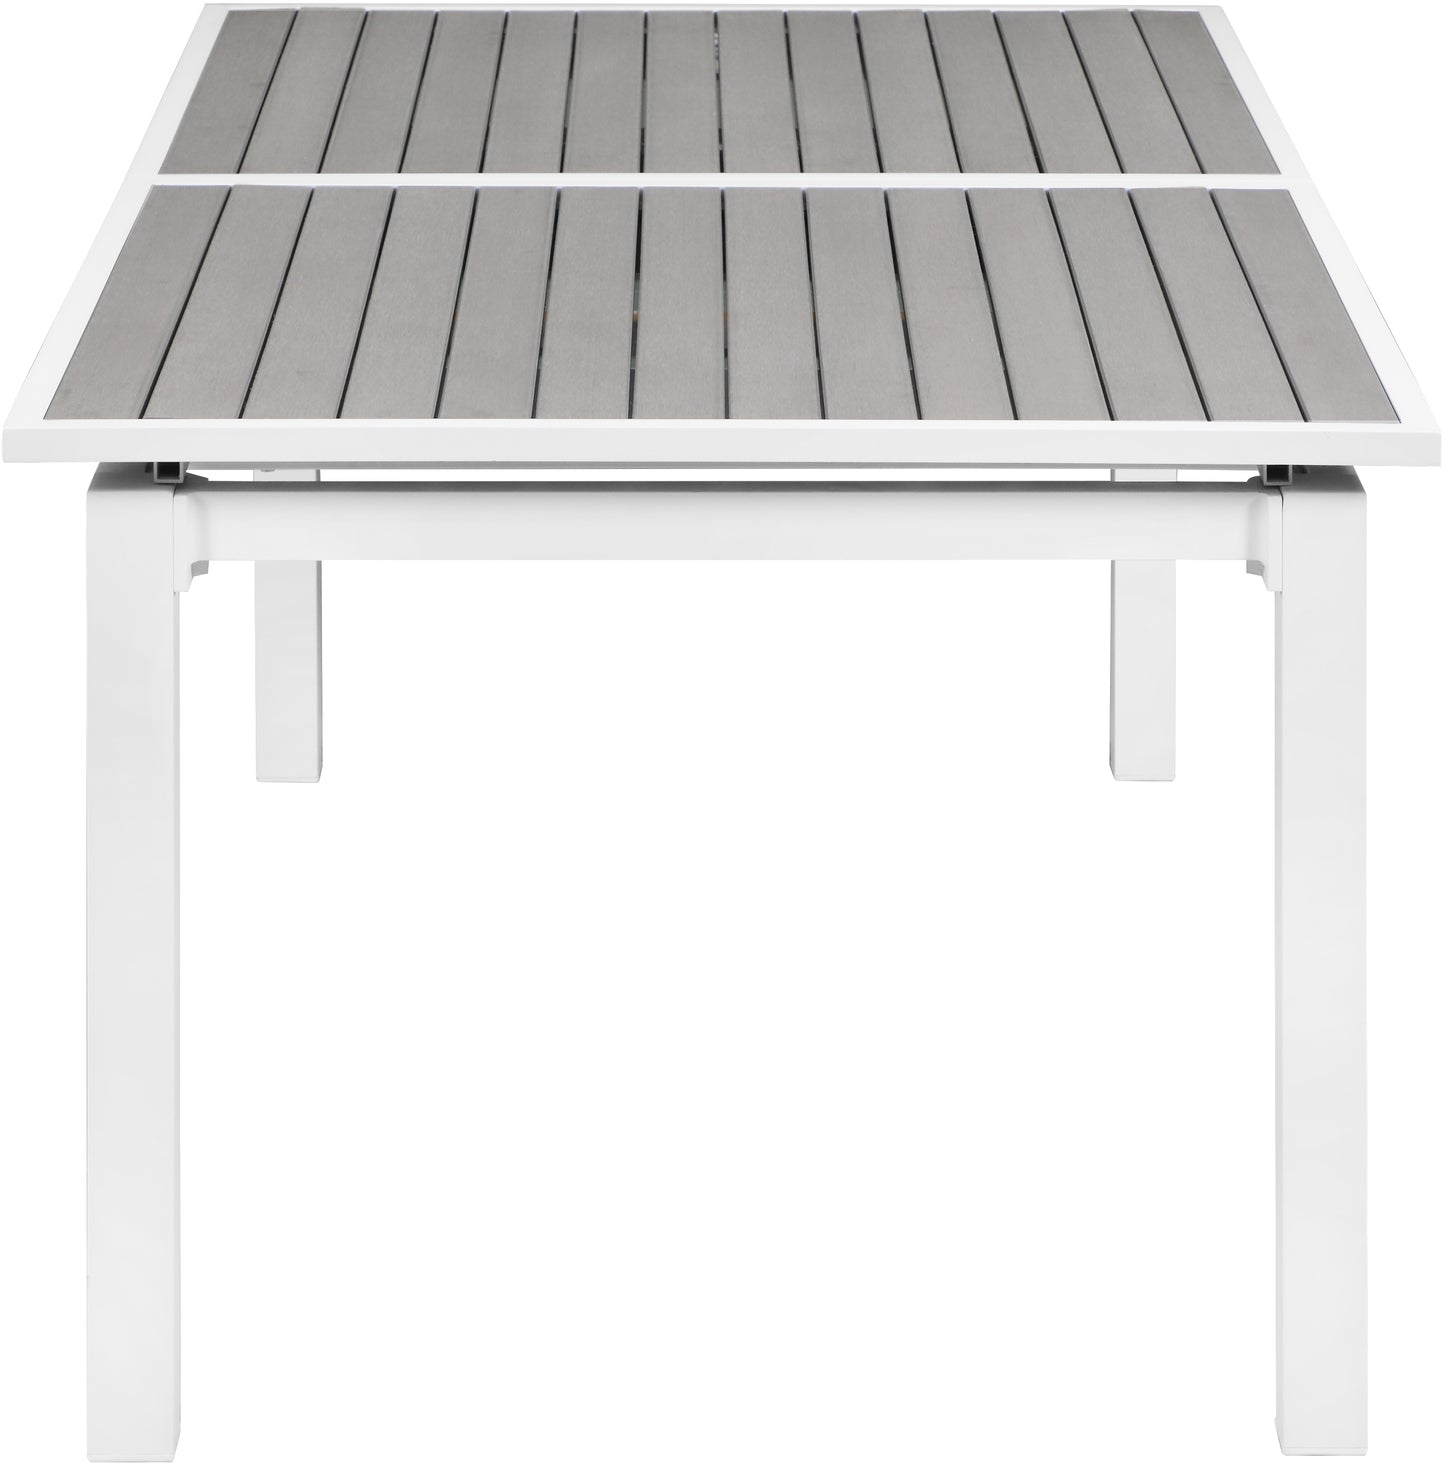 alyssa grey wood look accent paneling outdoor patio extendable aluminum dining table t